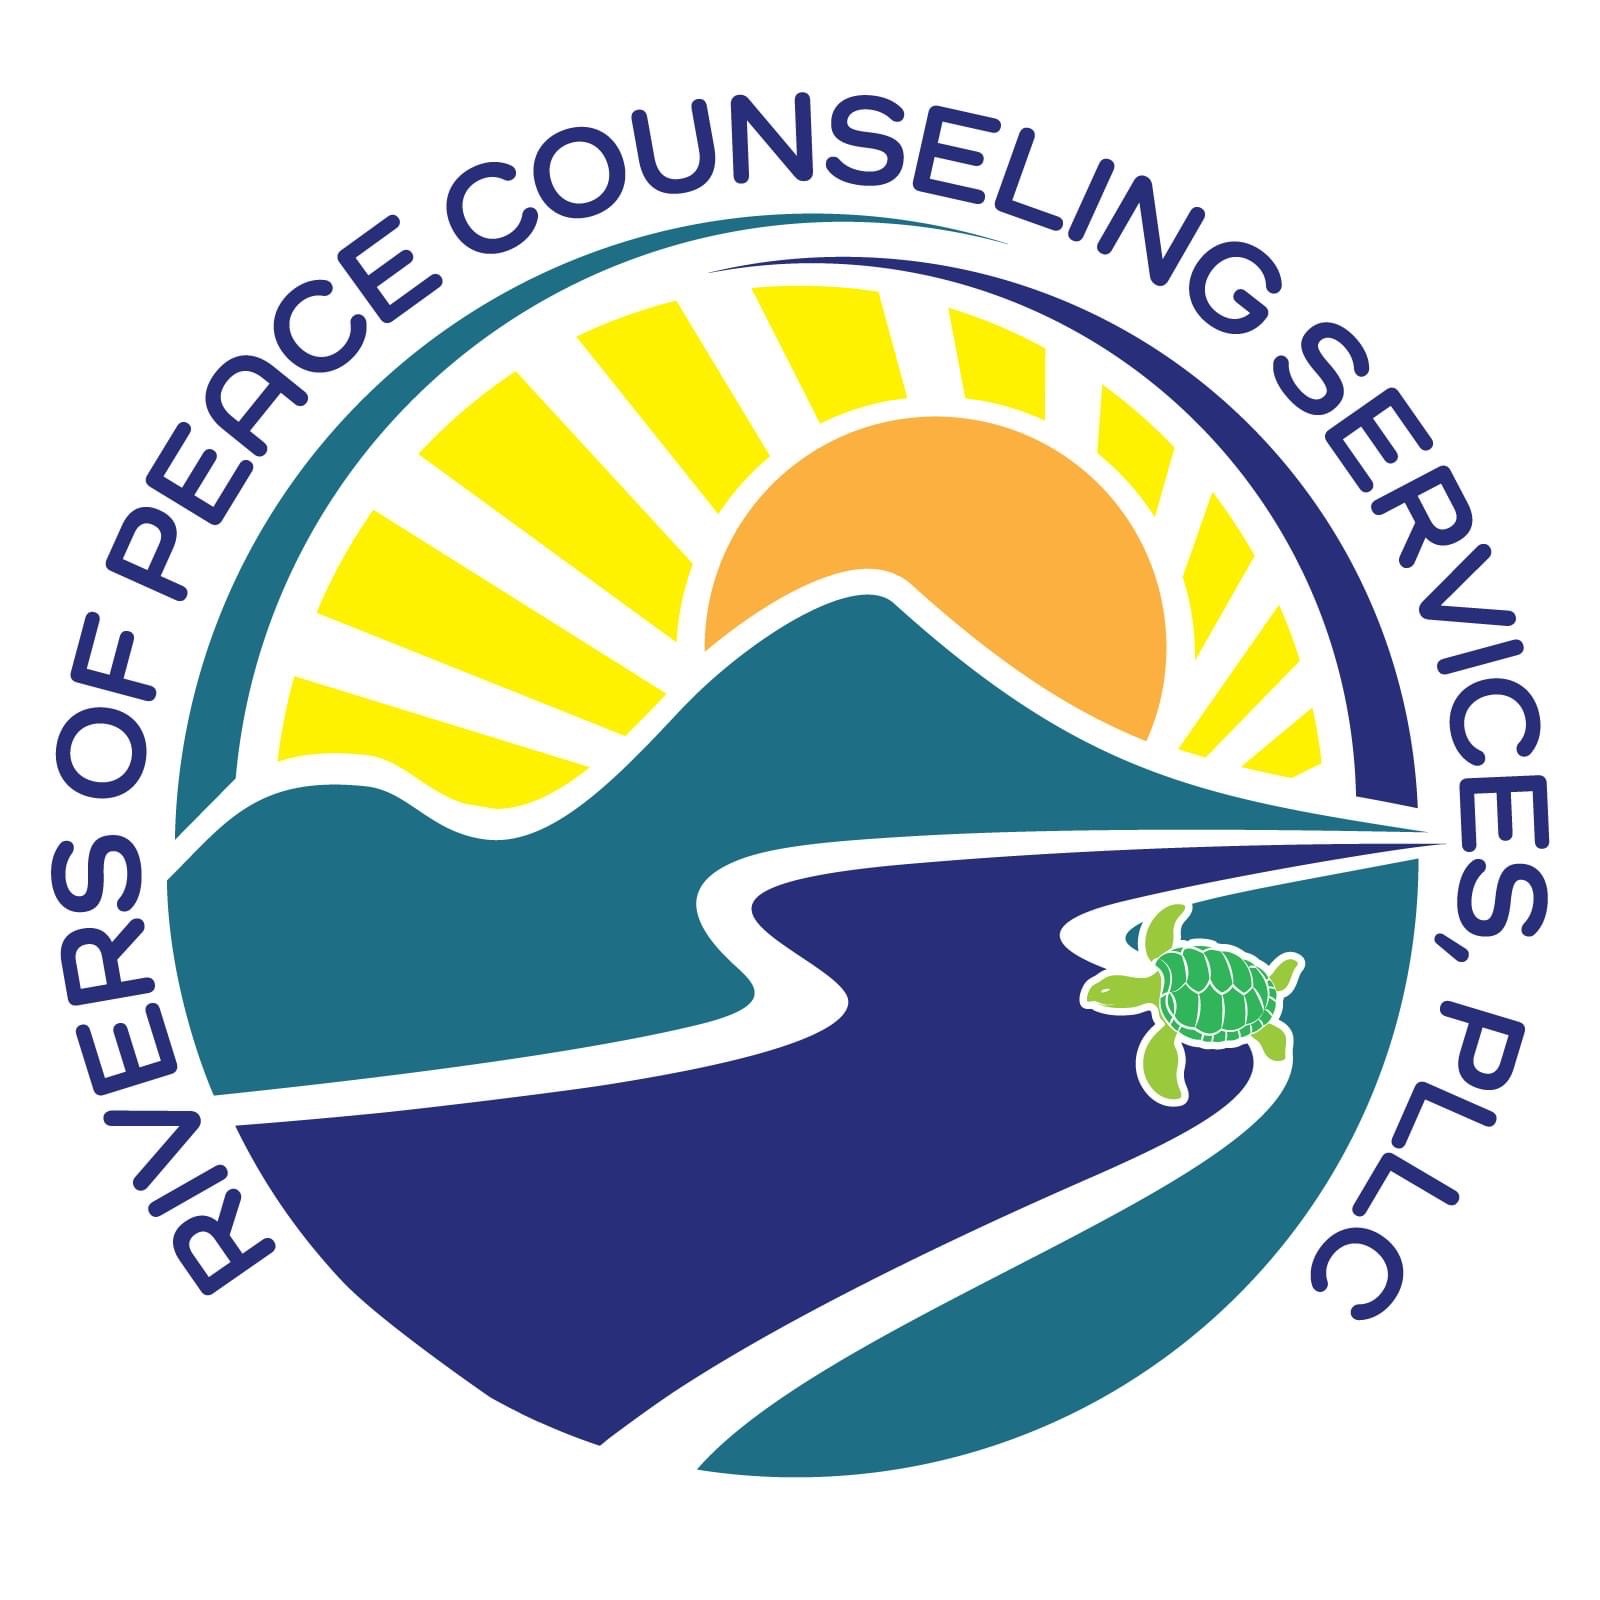 River Root Counseling